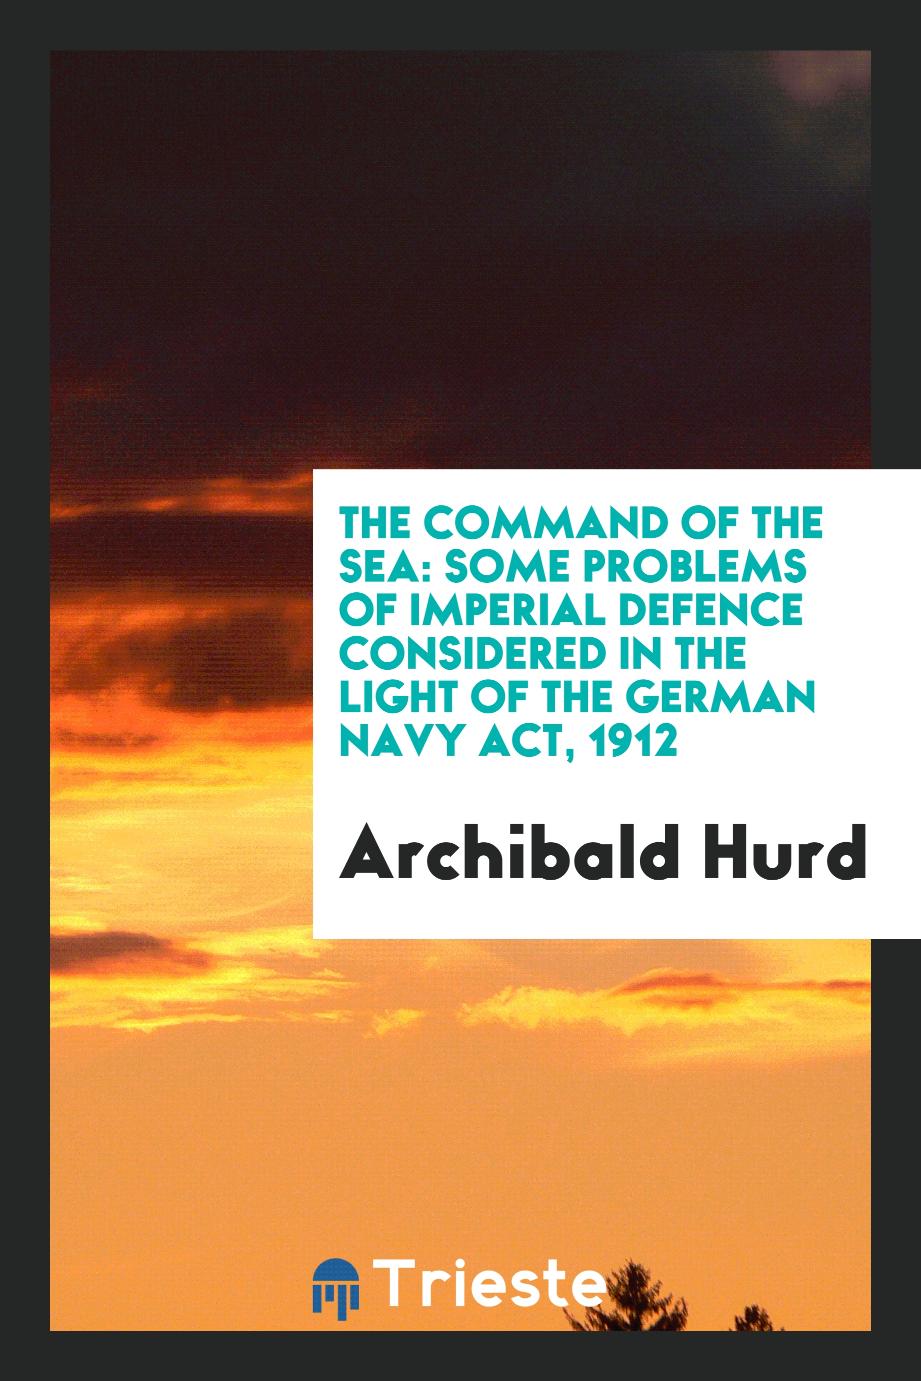 The command of the sea: some problems of imperial defence considered in the light of the German Navy Act, 1912